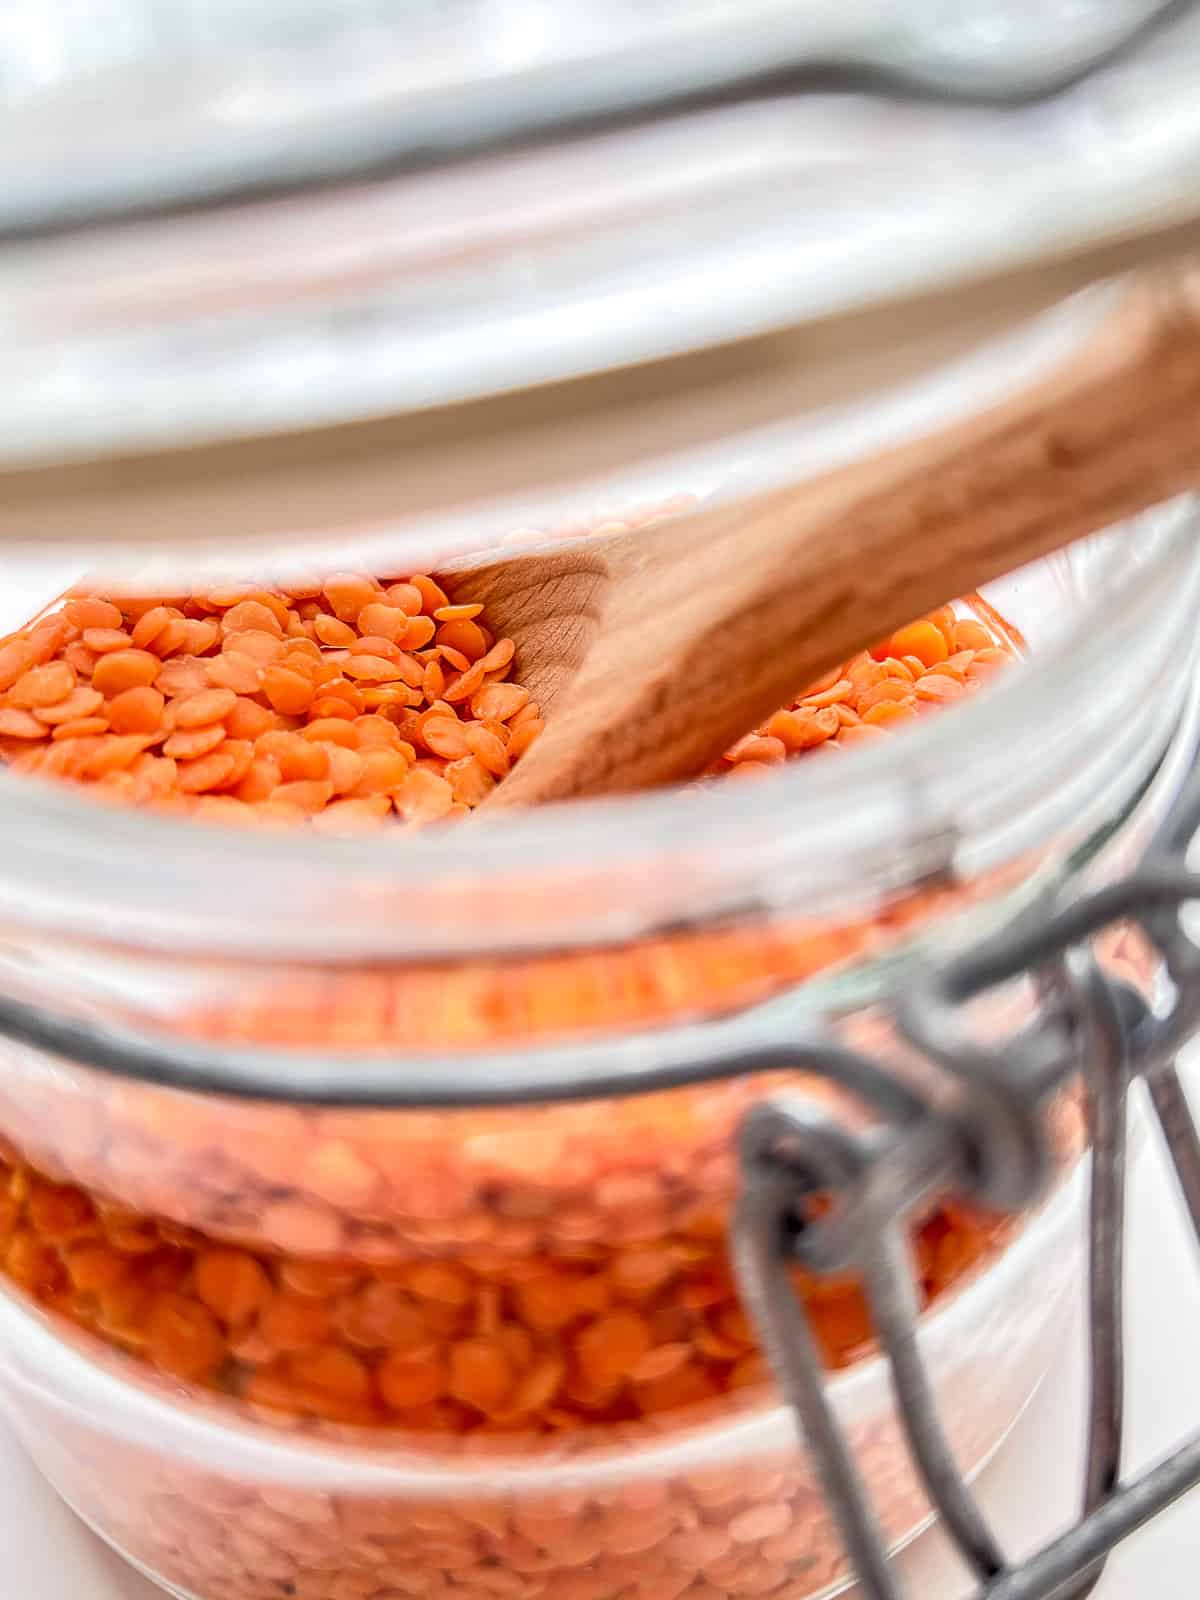 An image of red lentils in a small glass jar.